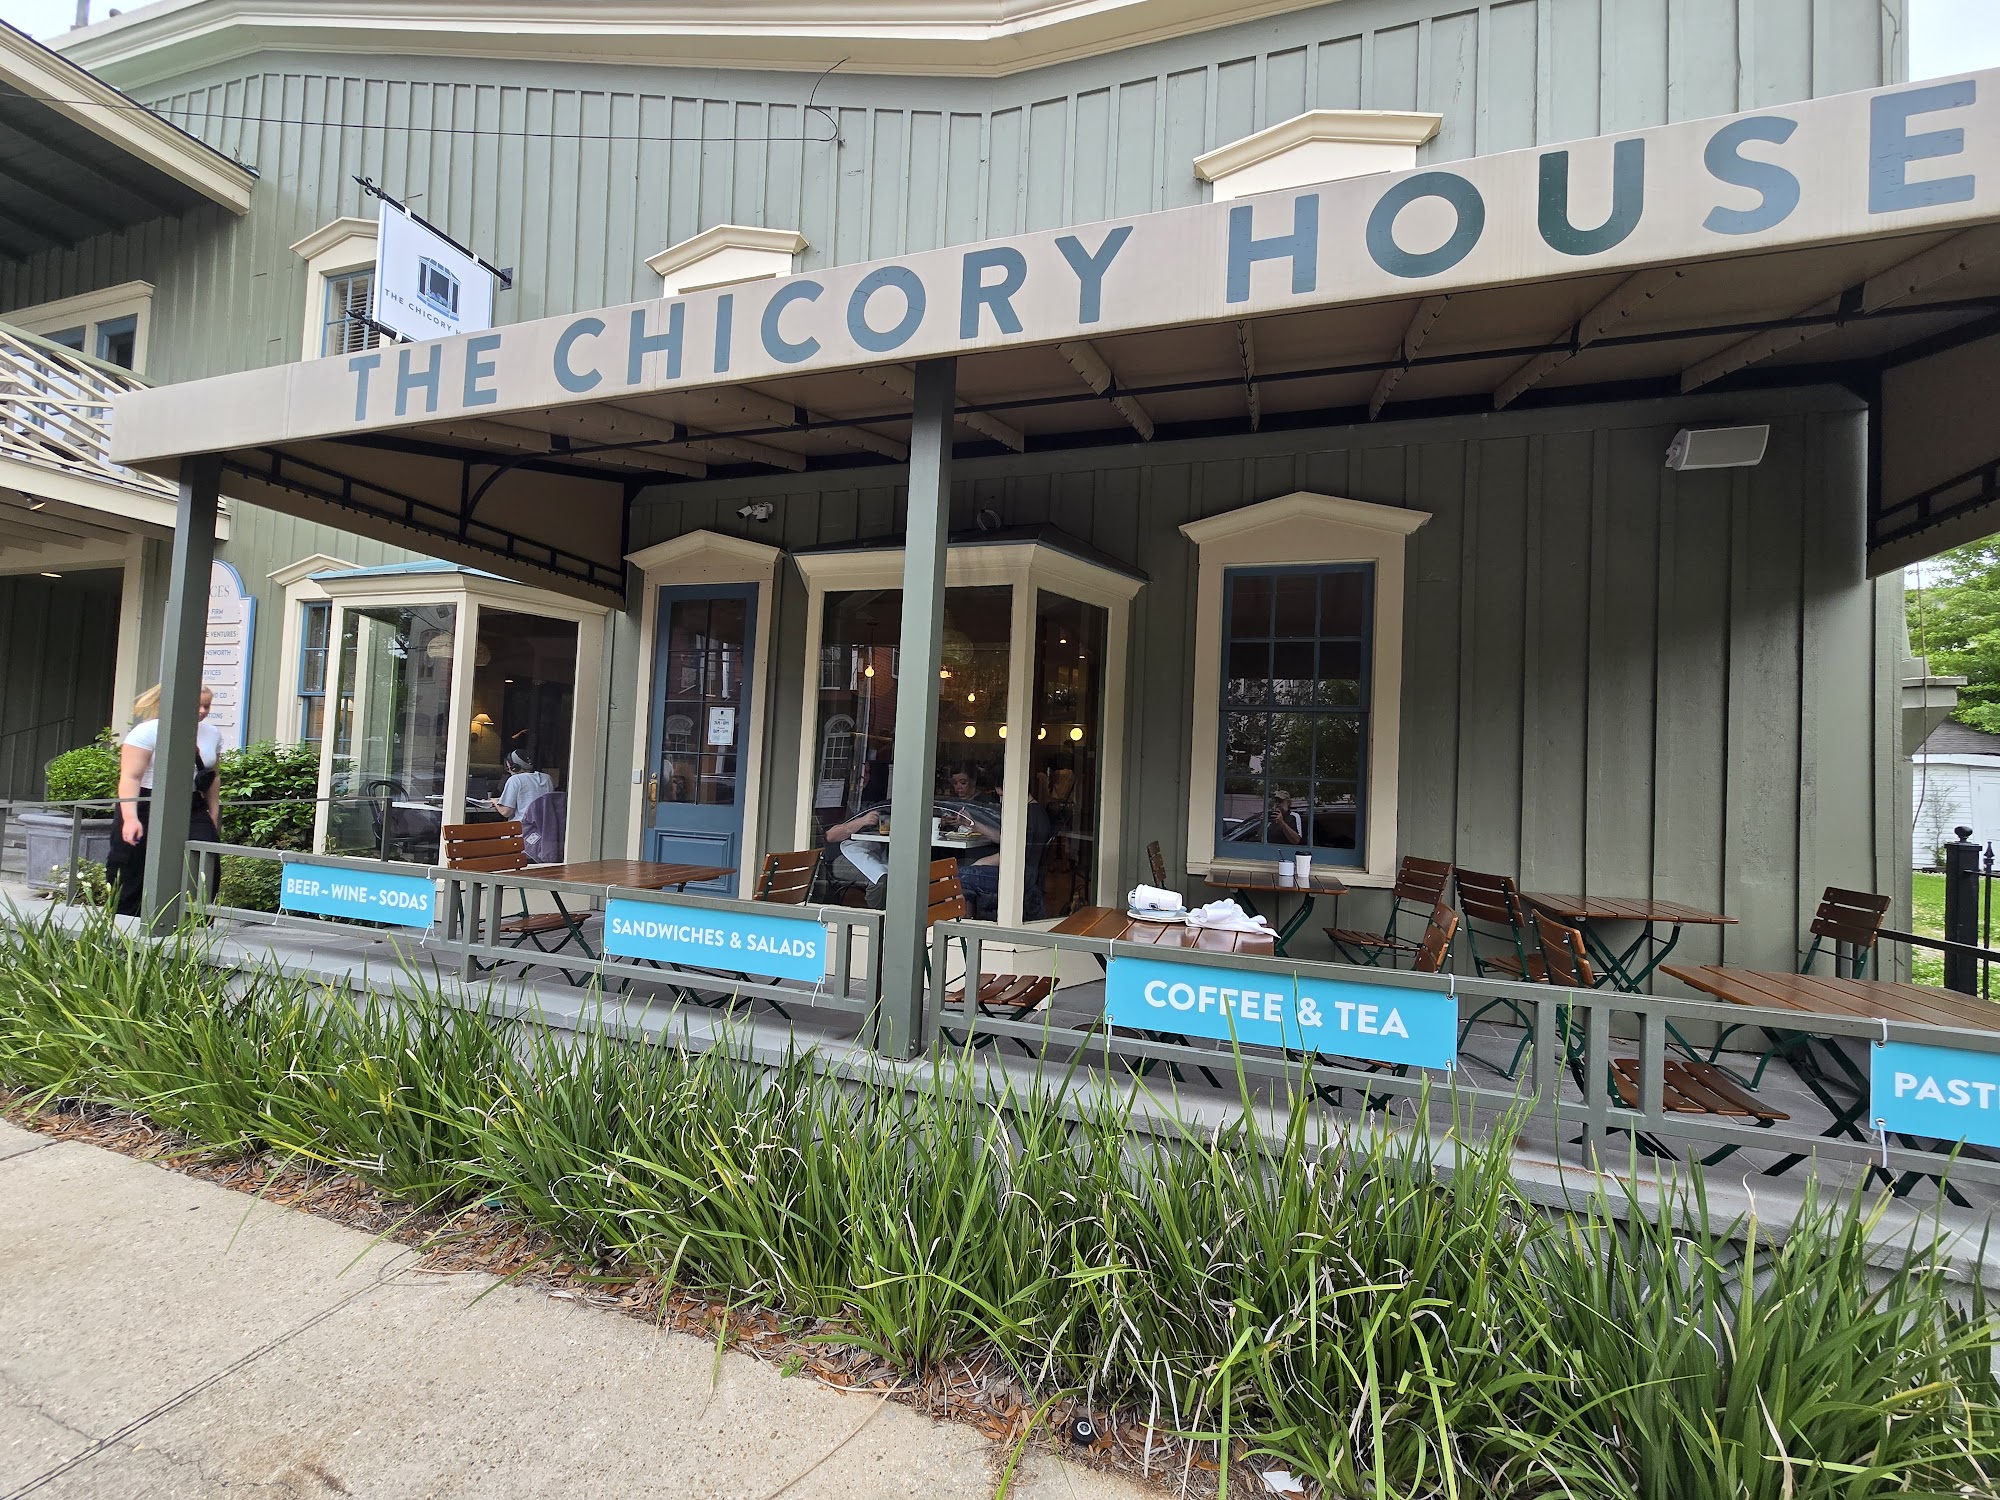 The Chicory House